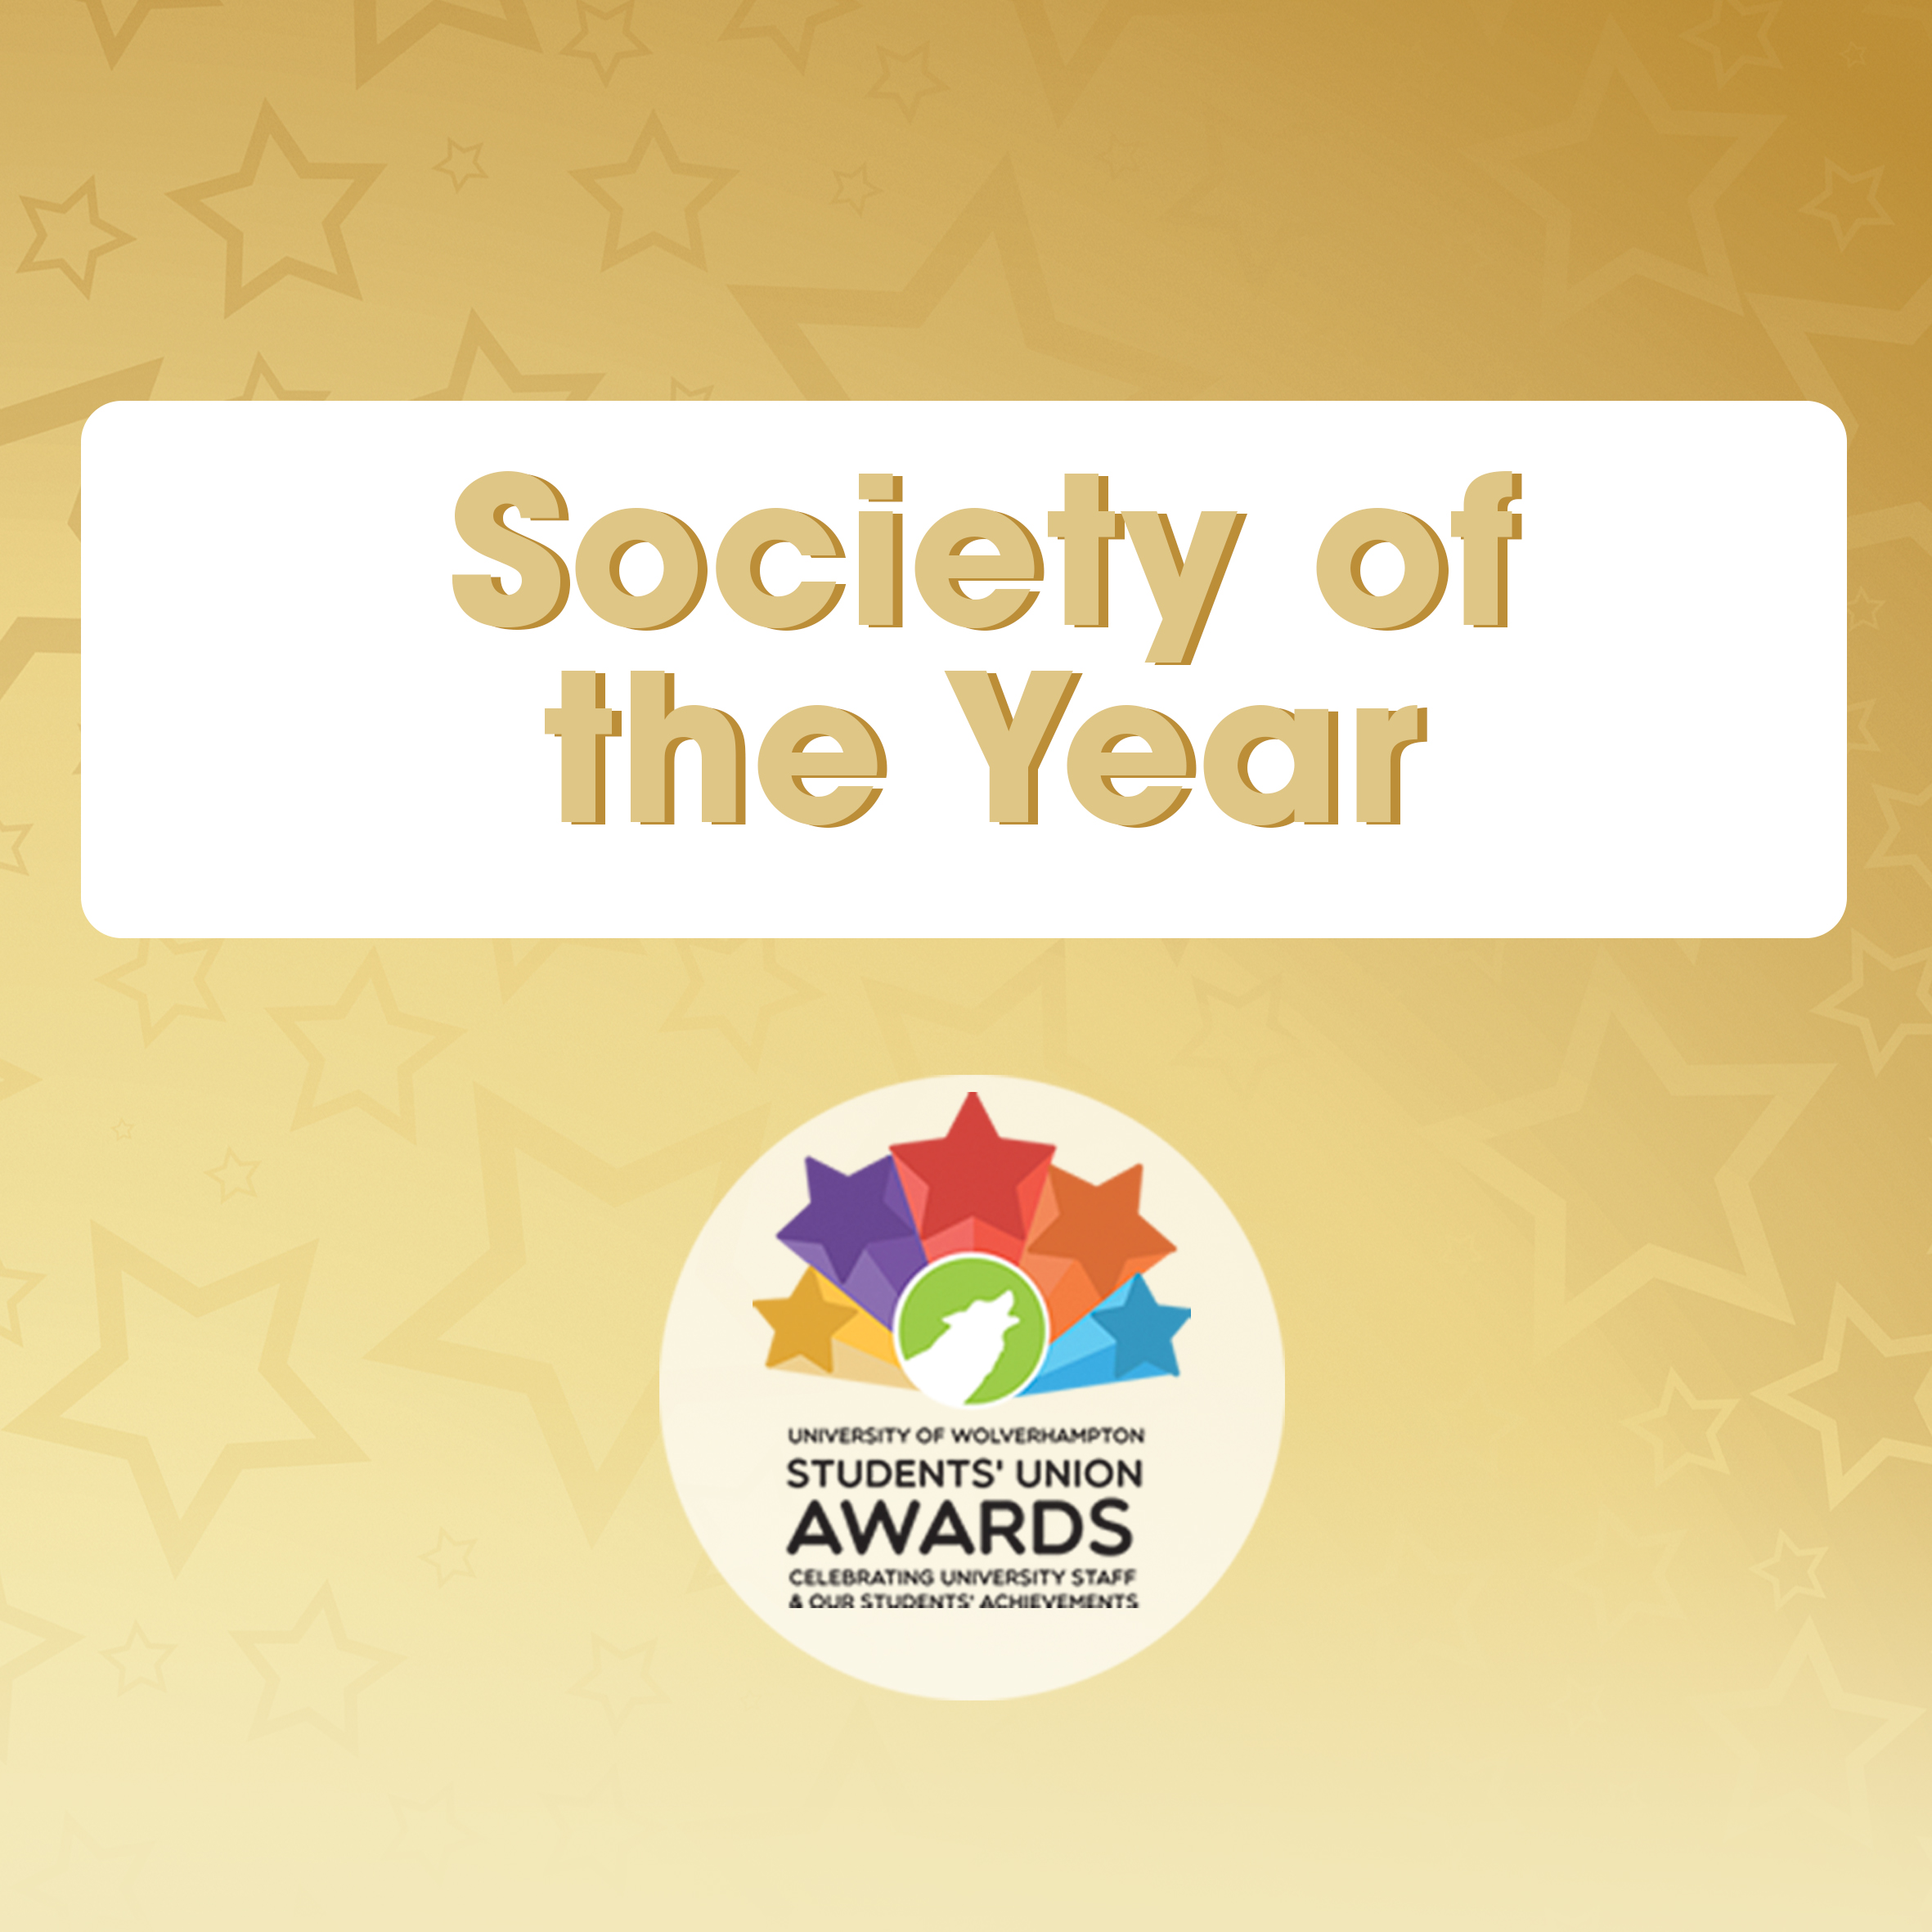 Society of the Year